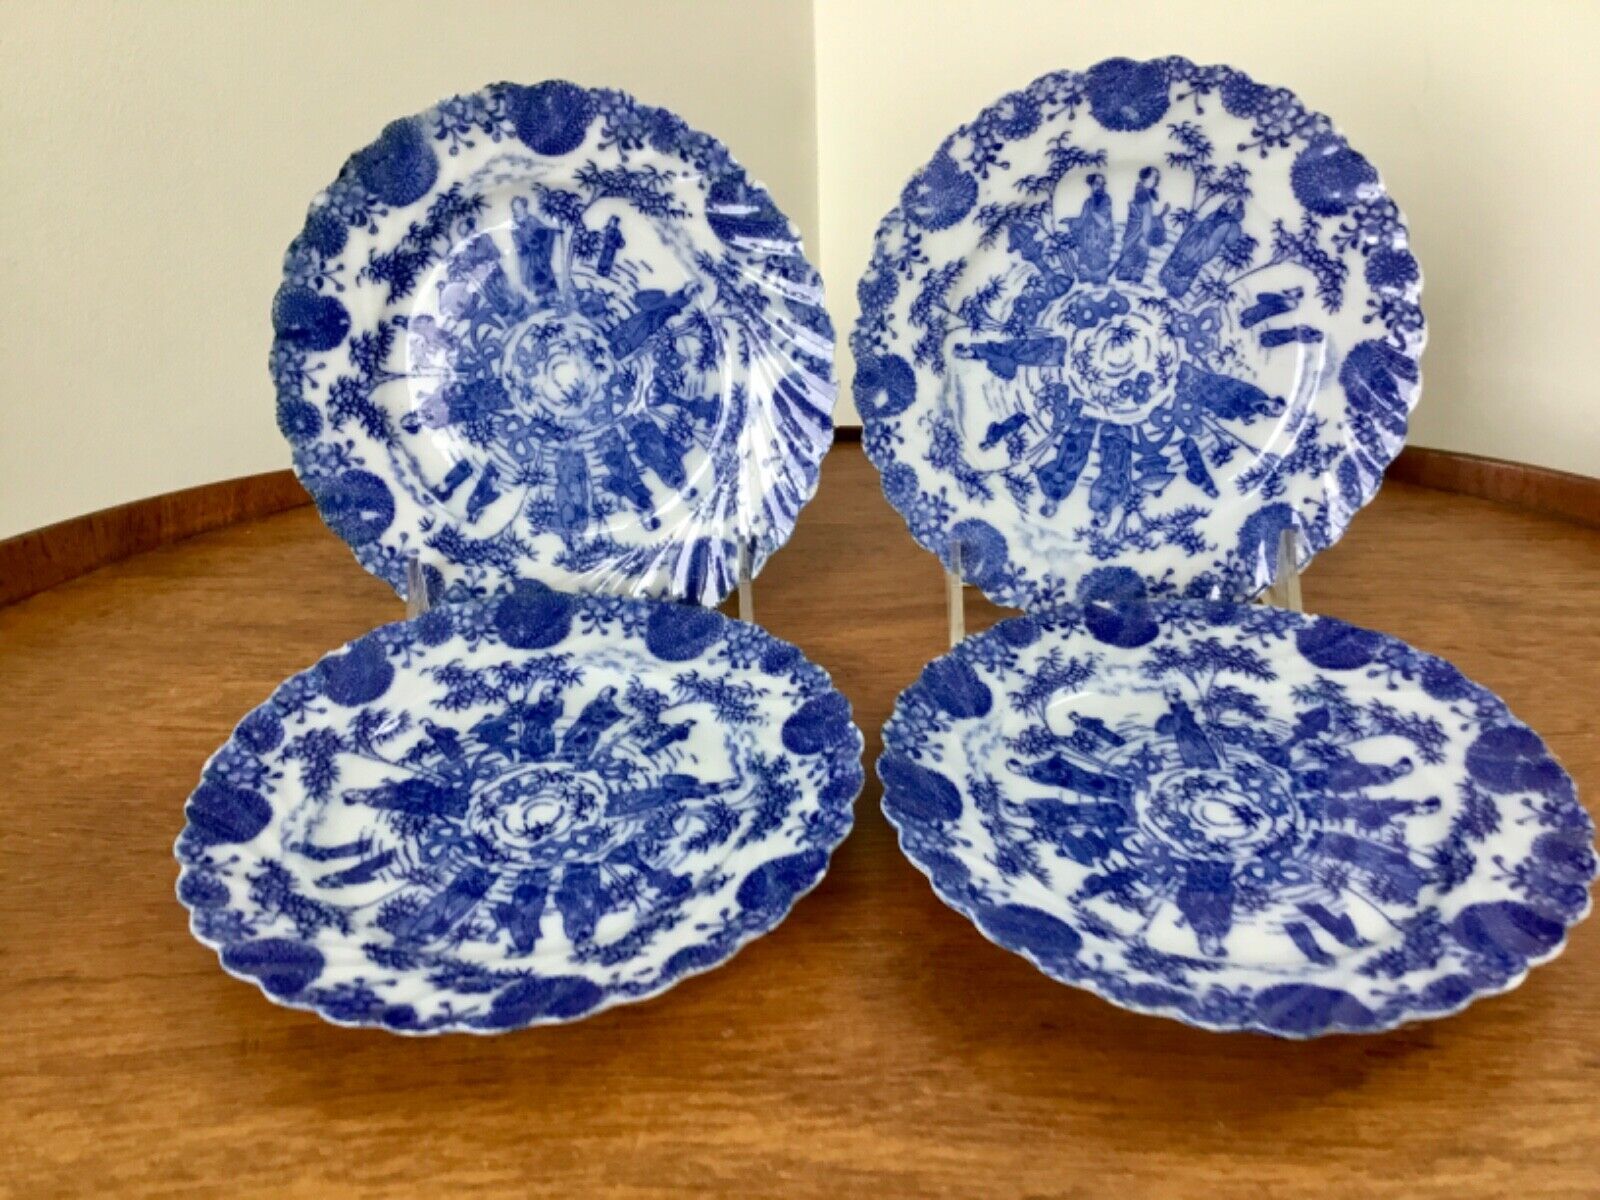  Antique Asian /Chines /Japanese 4 Blue & White Plates Decorated w Sages 6 1/4” Без бренда - фотография #2